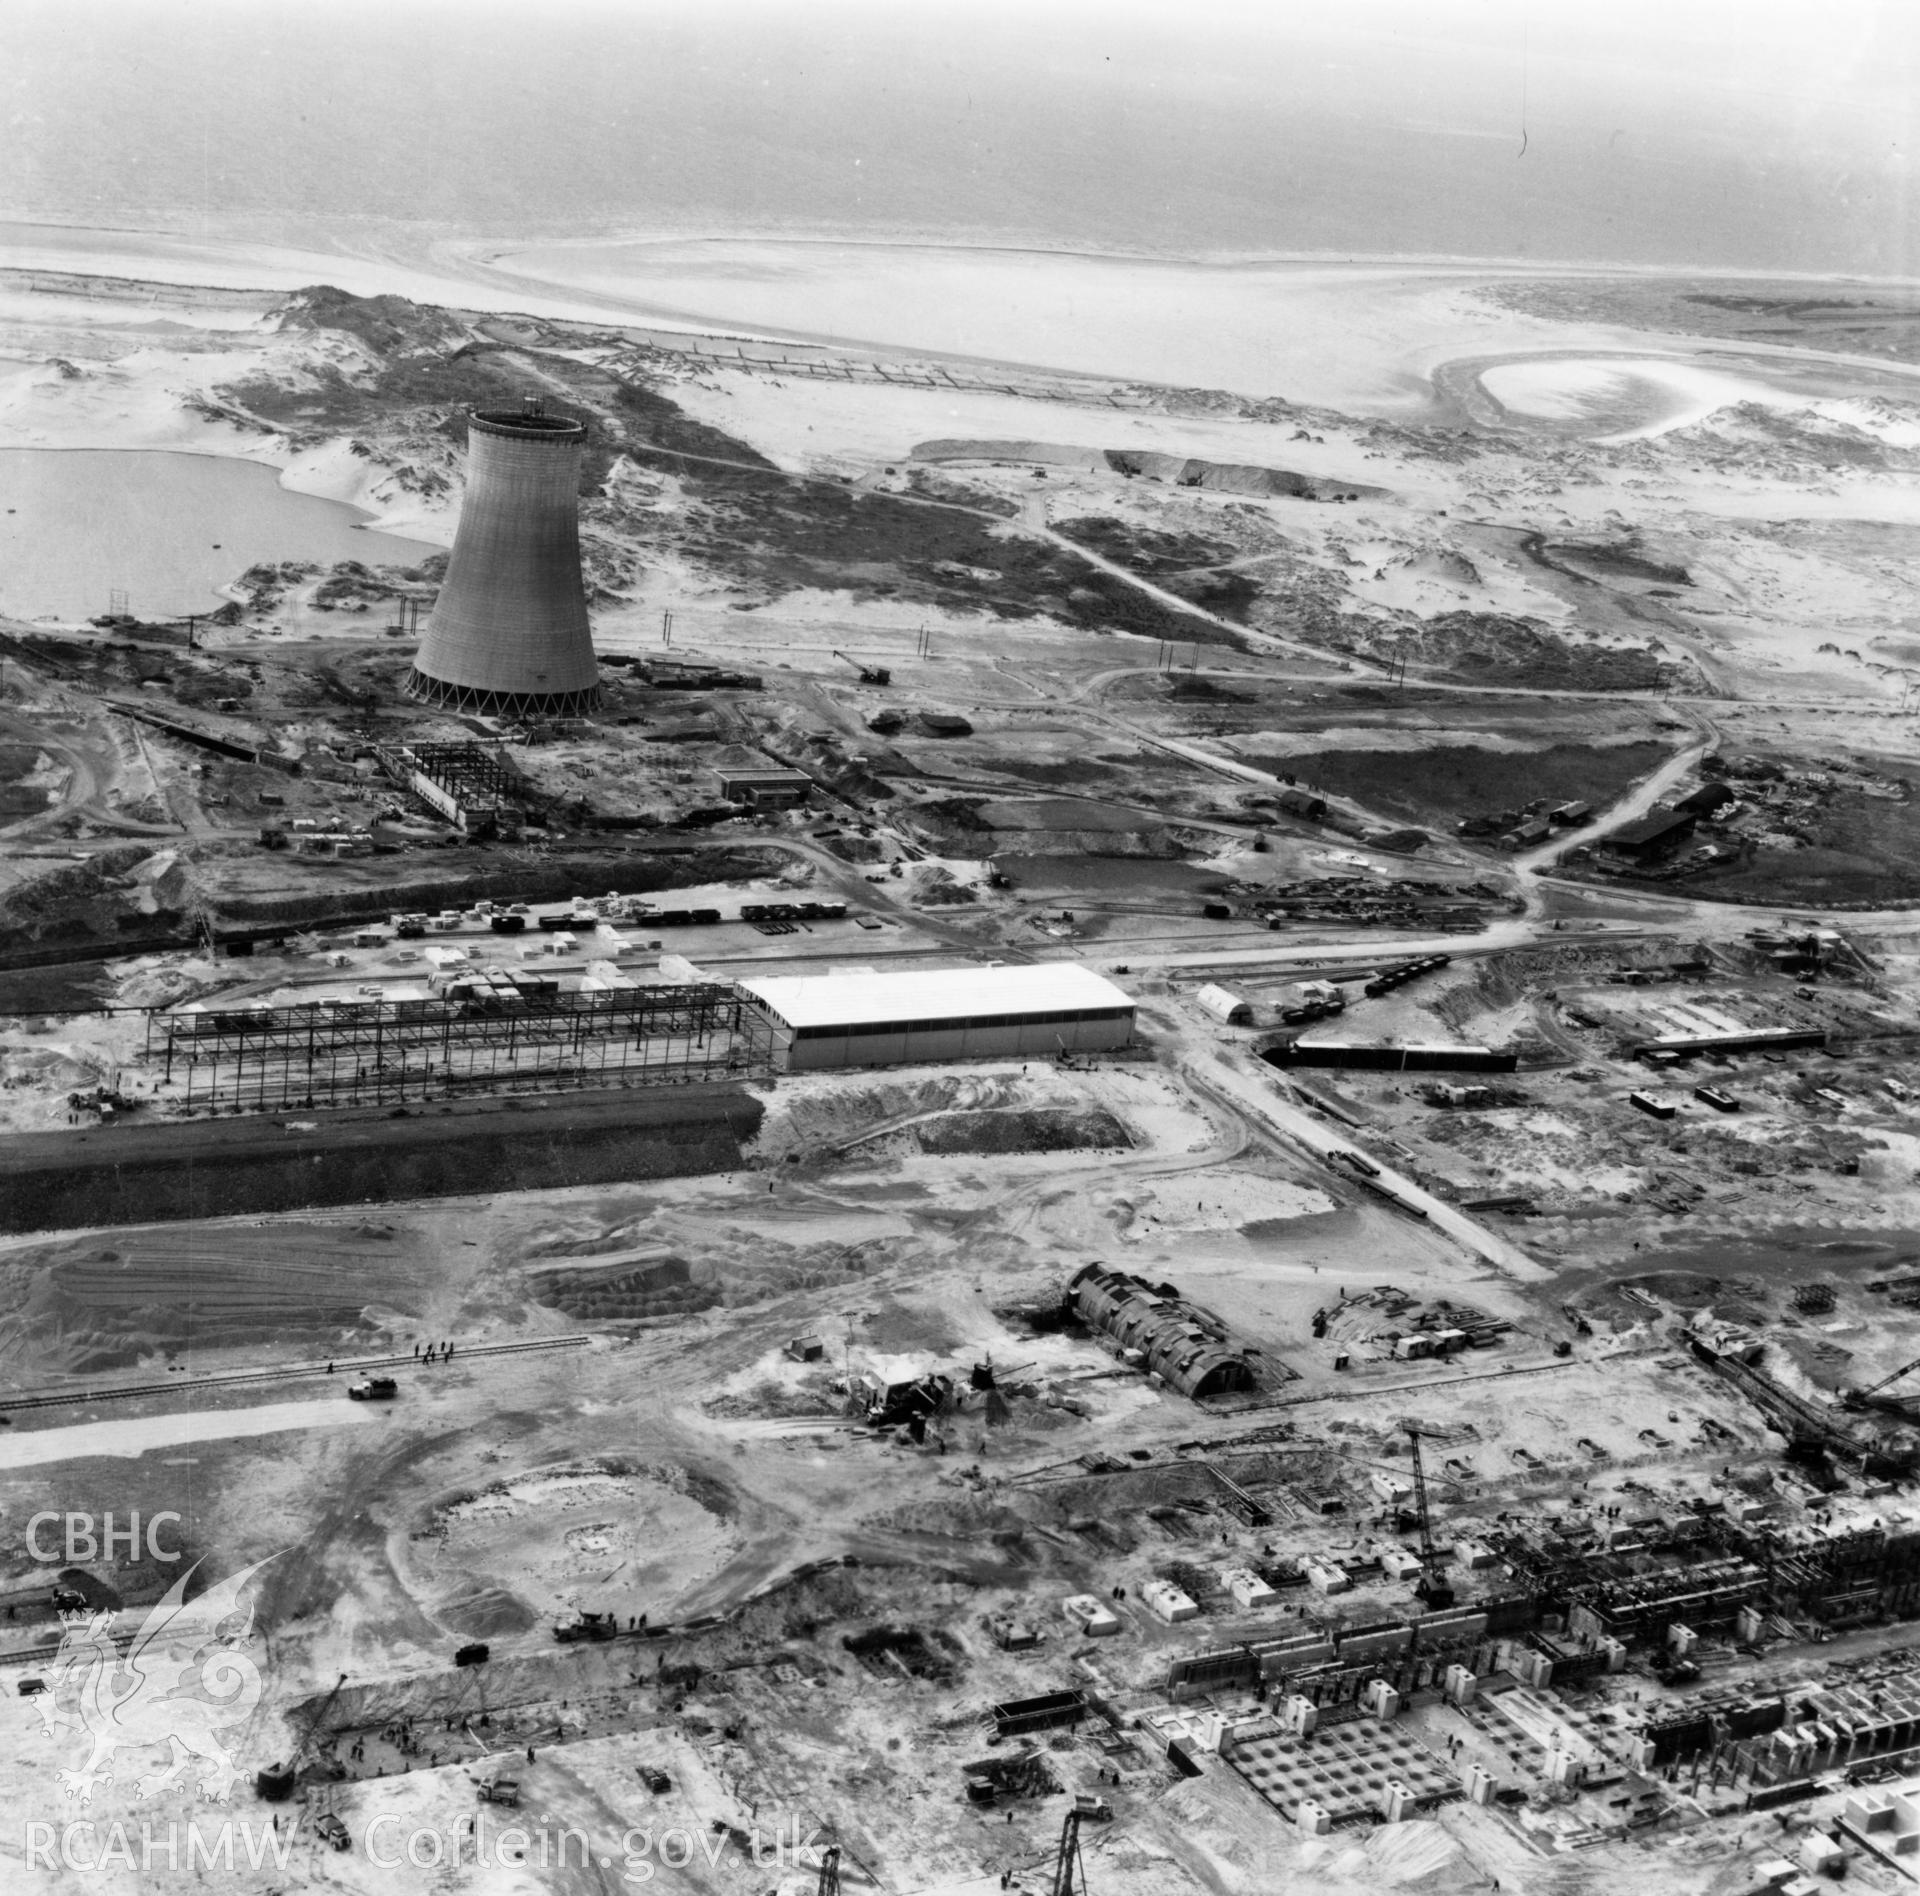 View of Abbey Steelworks, Port Talbot, under construction, showing cooling tower. Oblique aerial photograph, 5?" cut roll film.